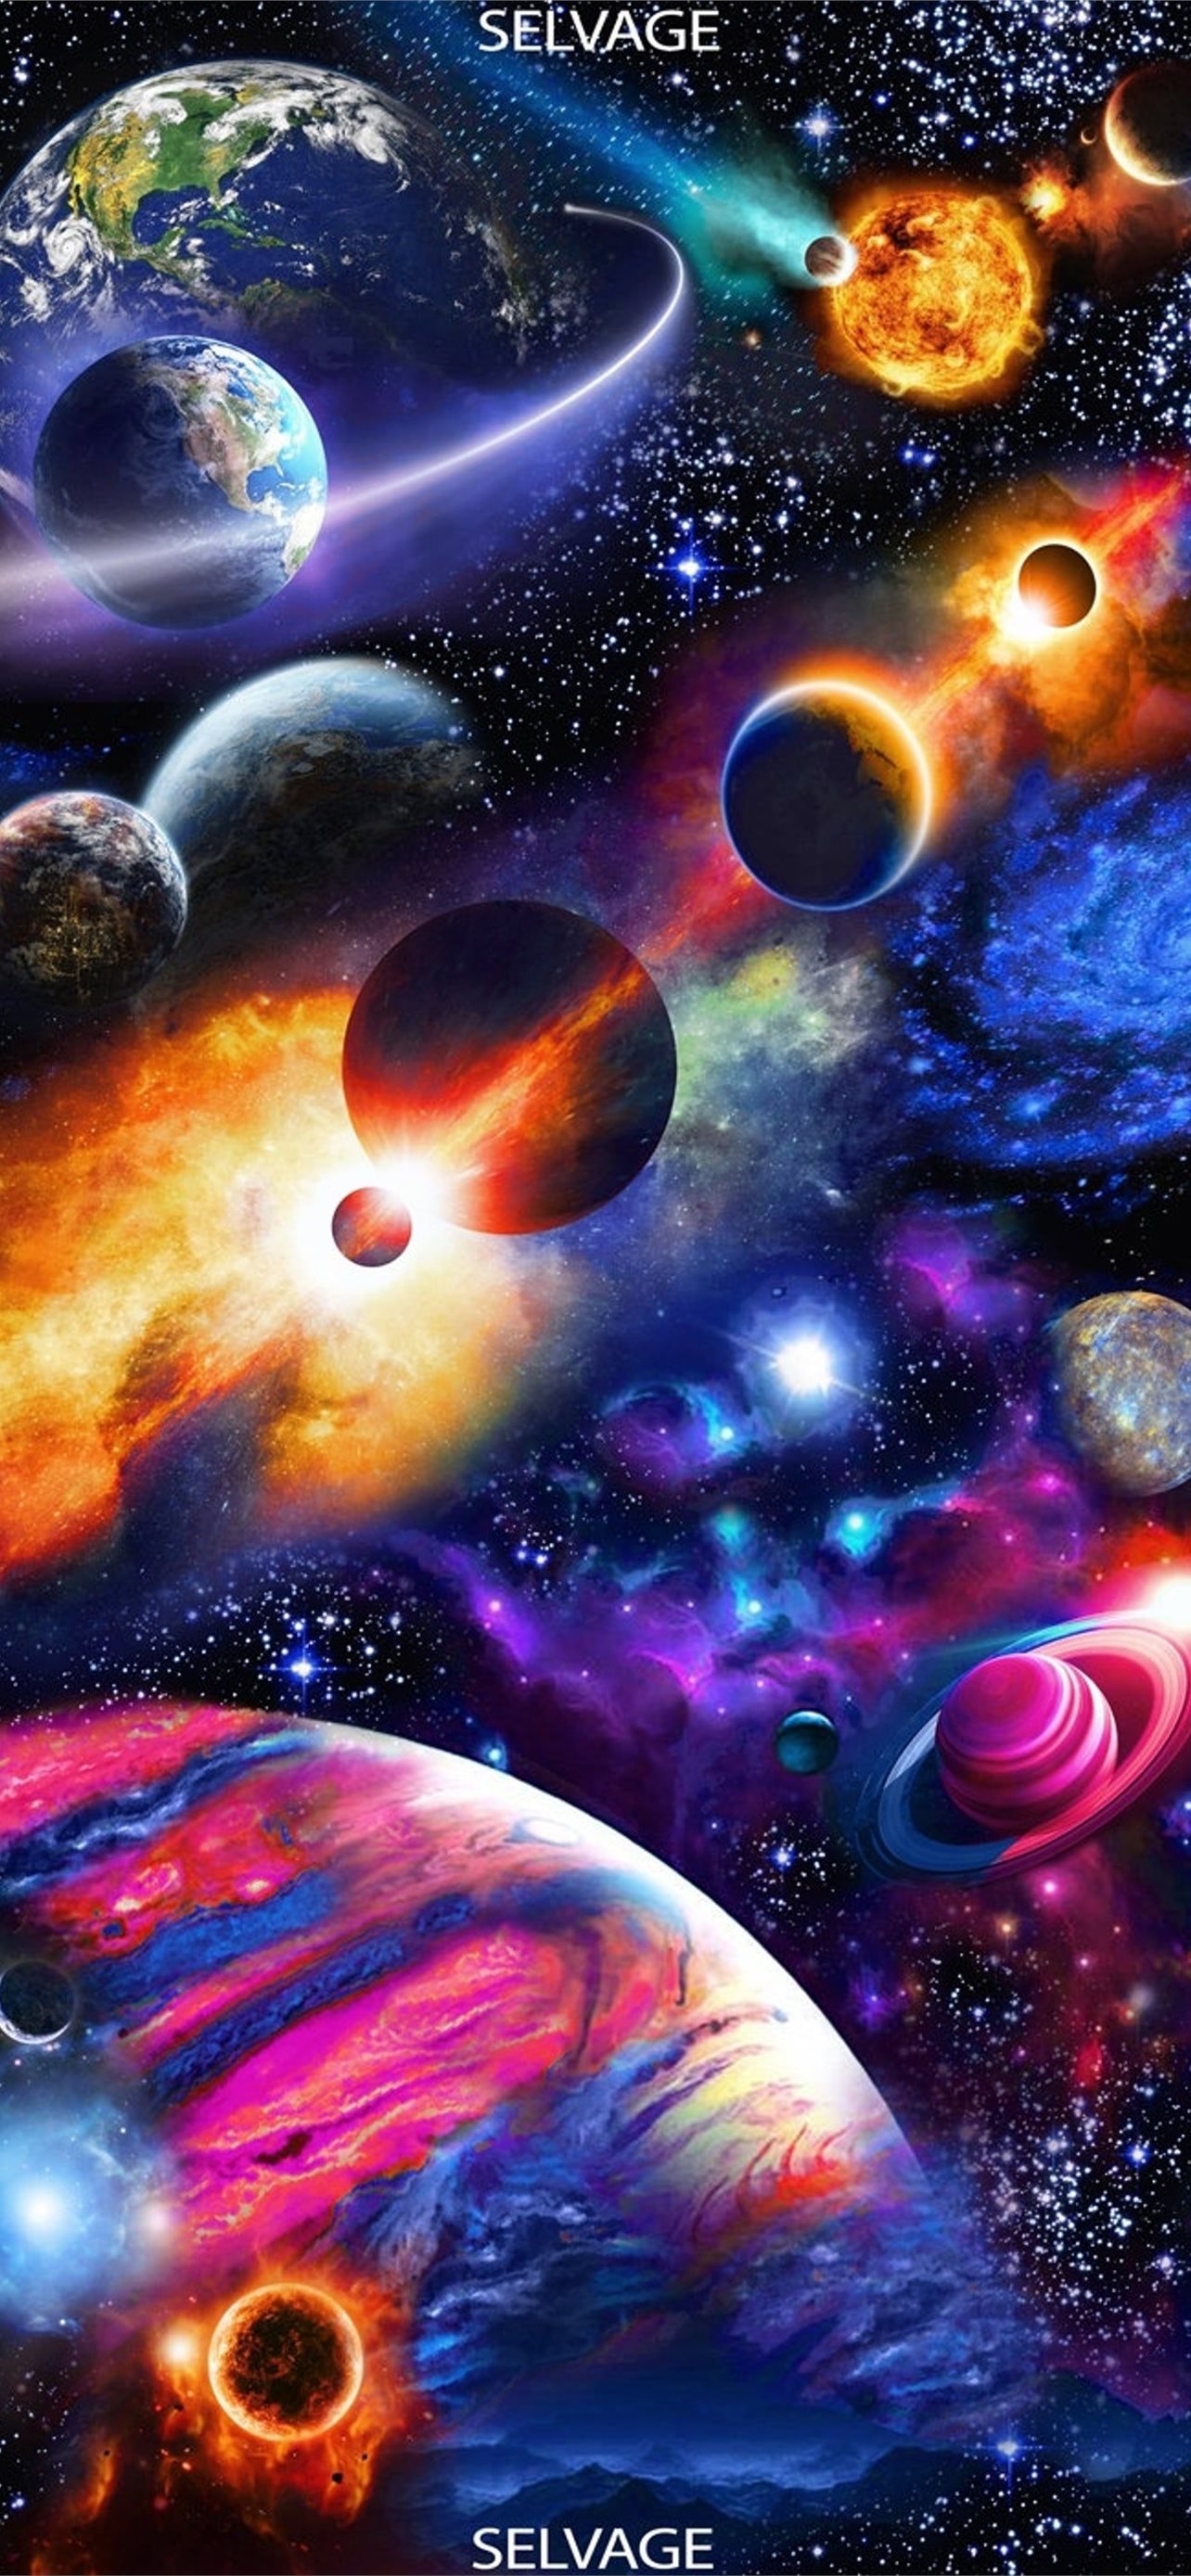 planets in are galaxy